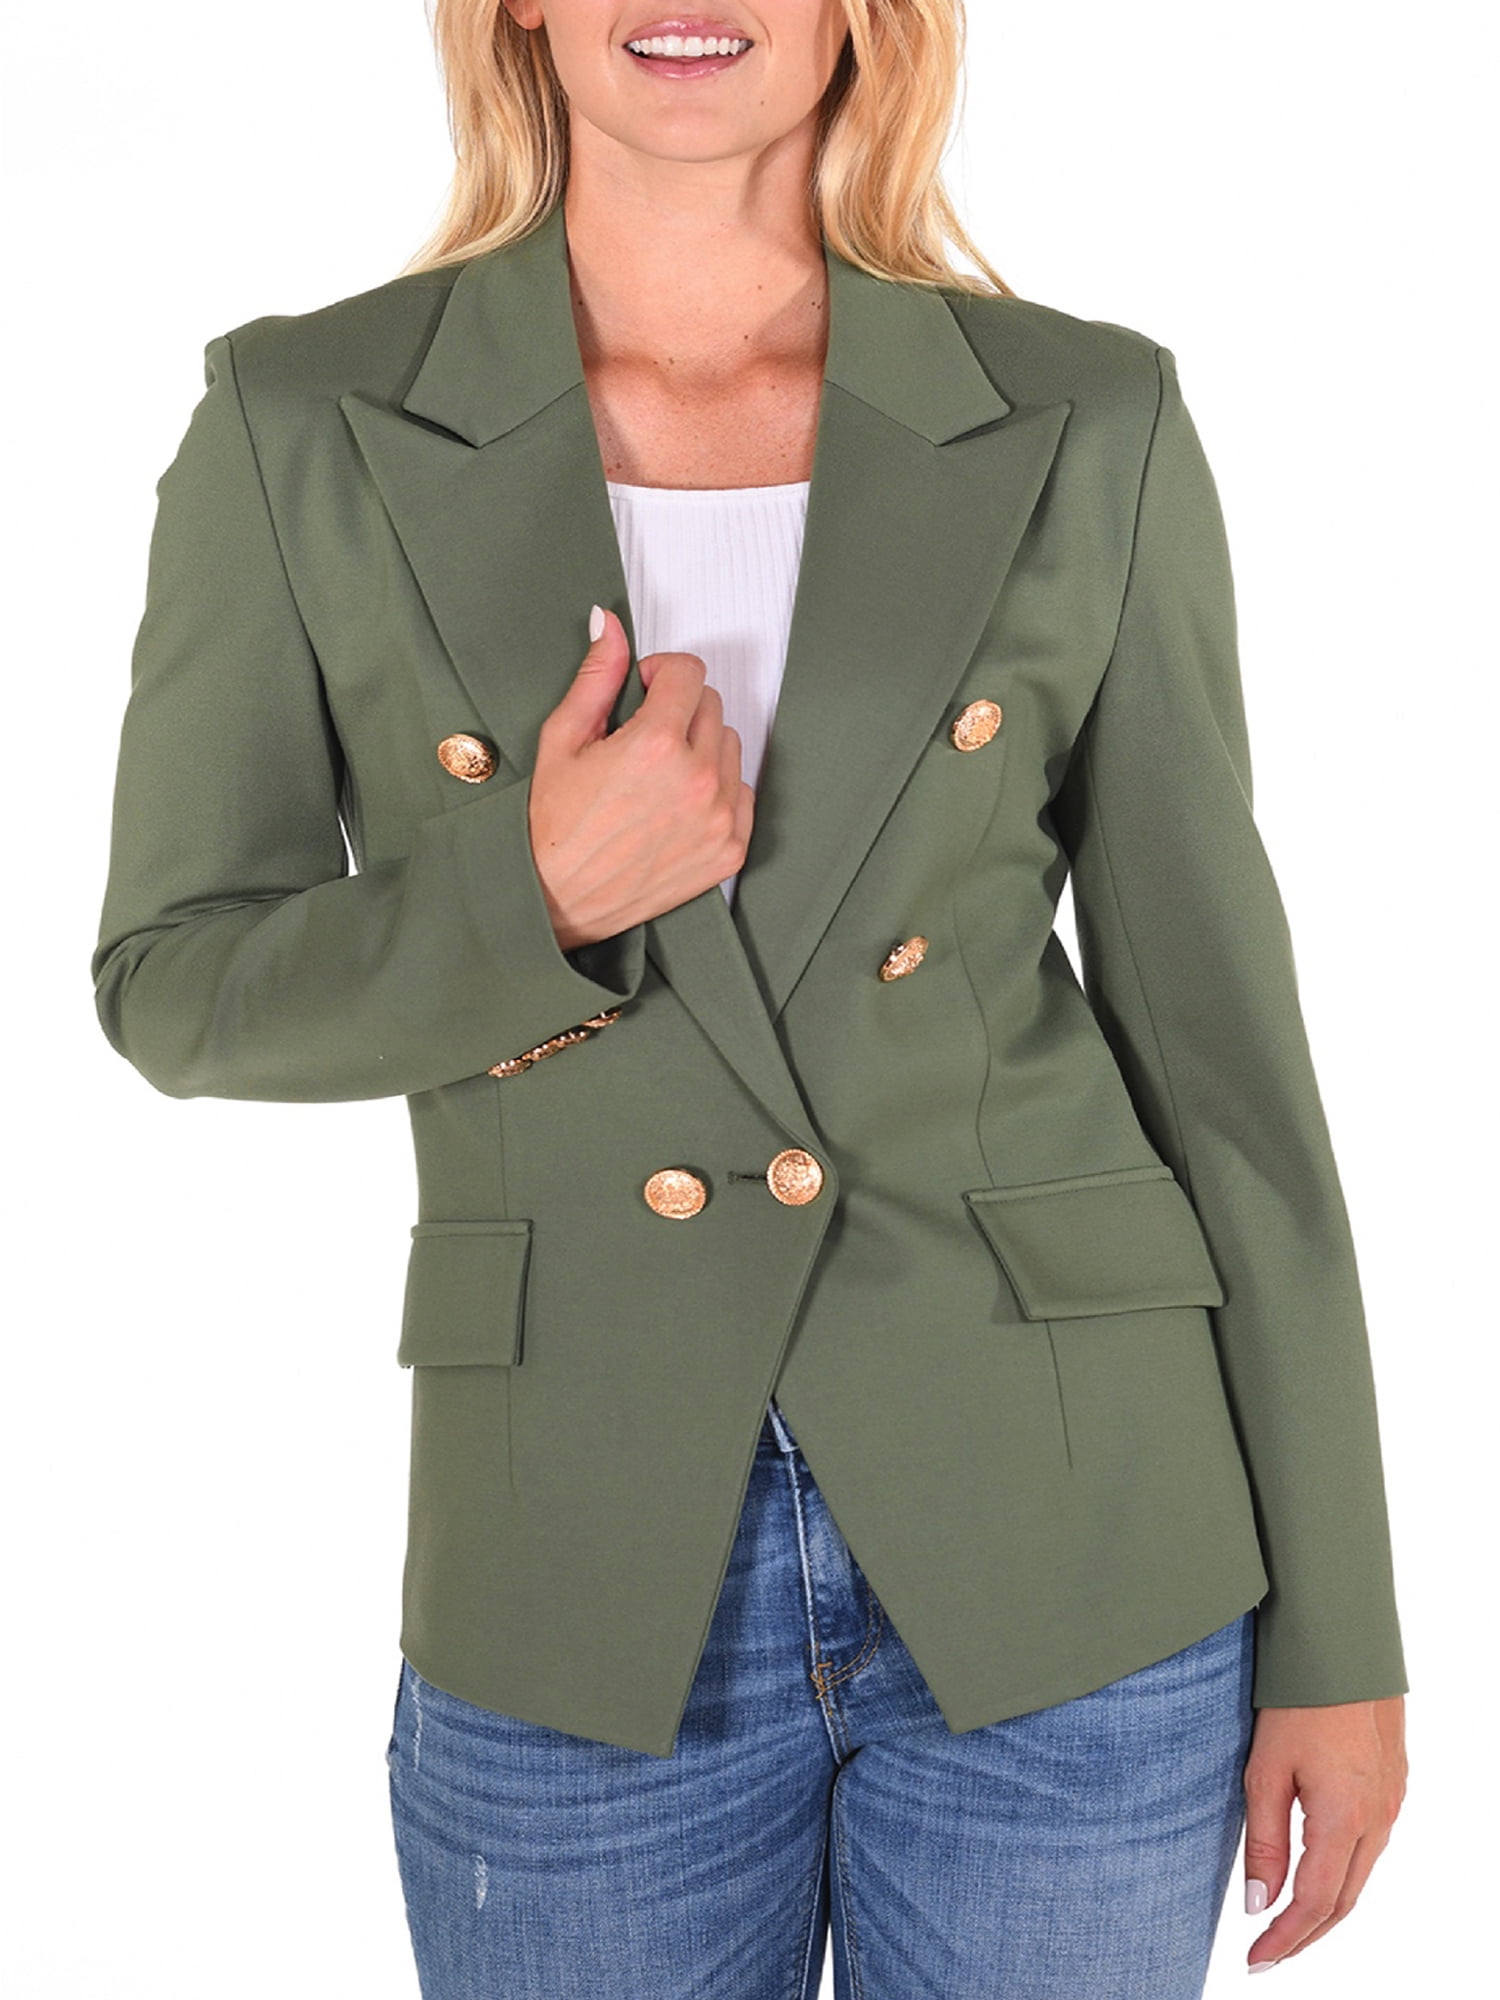 Attitude Unknown Women's and Women's Plus Double Breasted Blazer with  Metallic Buttons